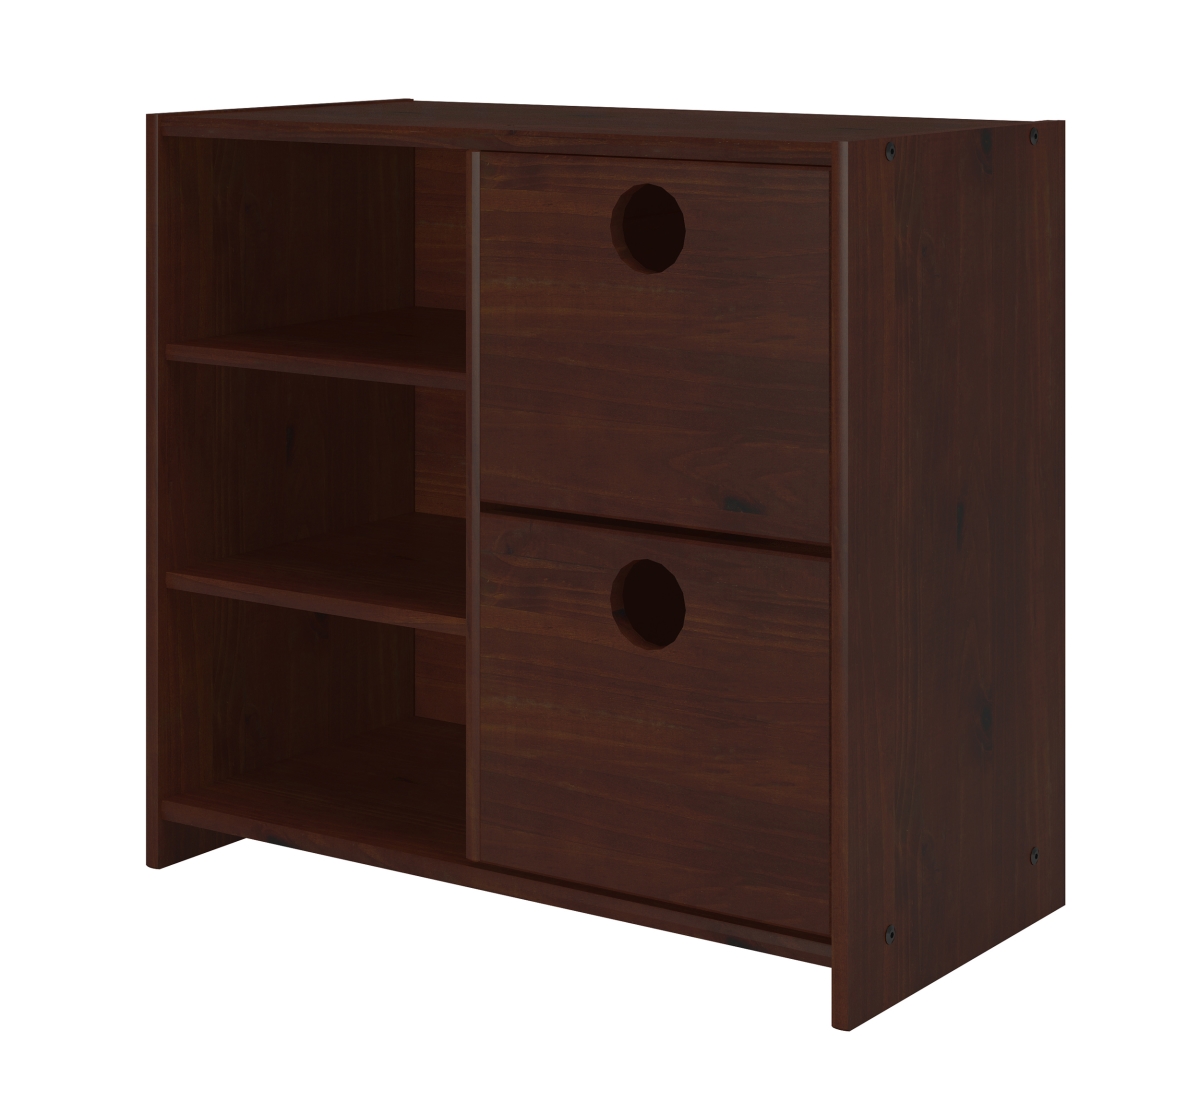 Pd-780c-tcp 2 Drawer Chest With Shelves In Dark Cappuccino